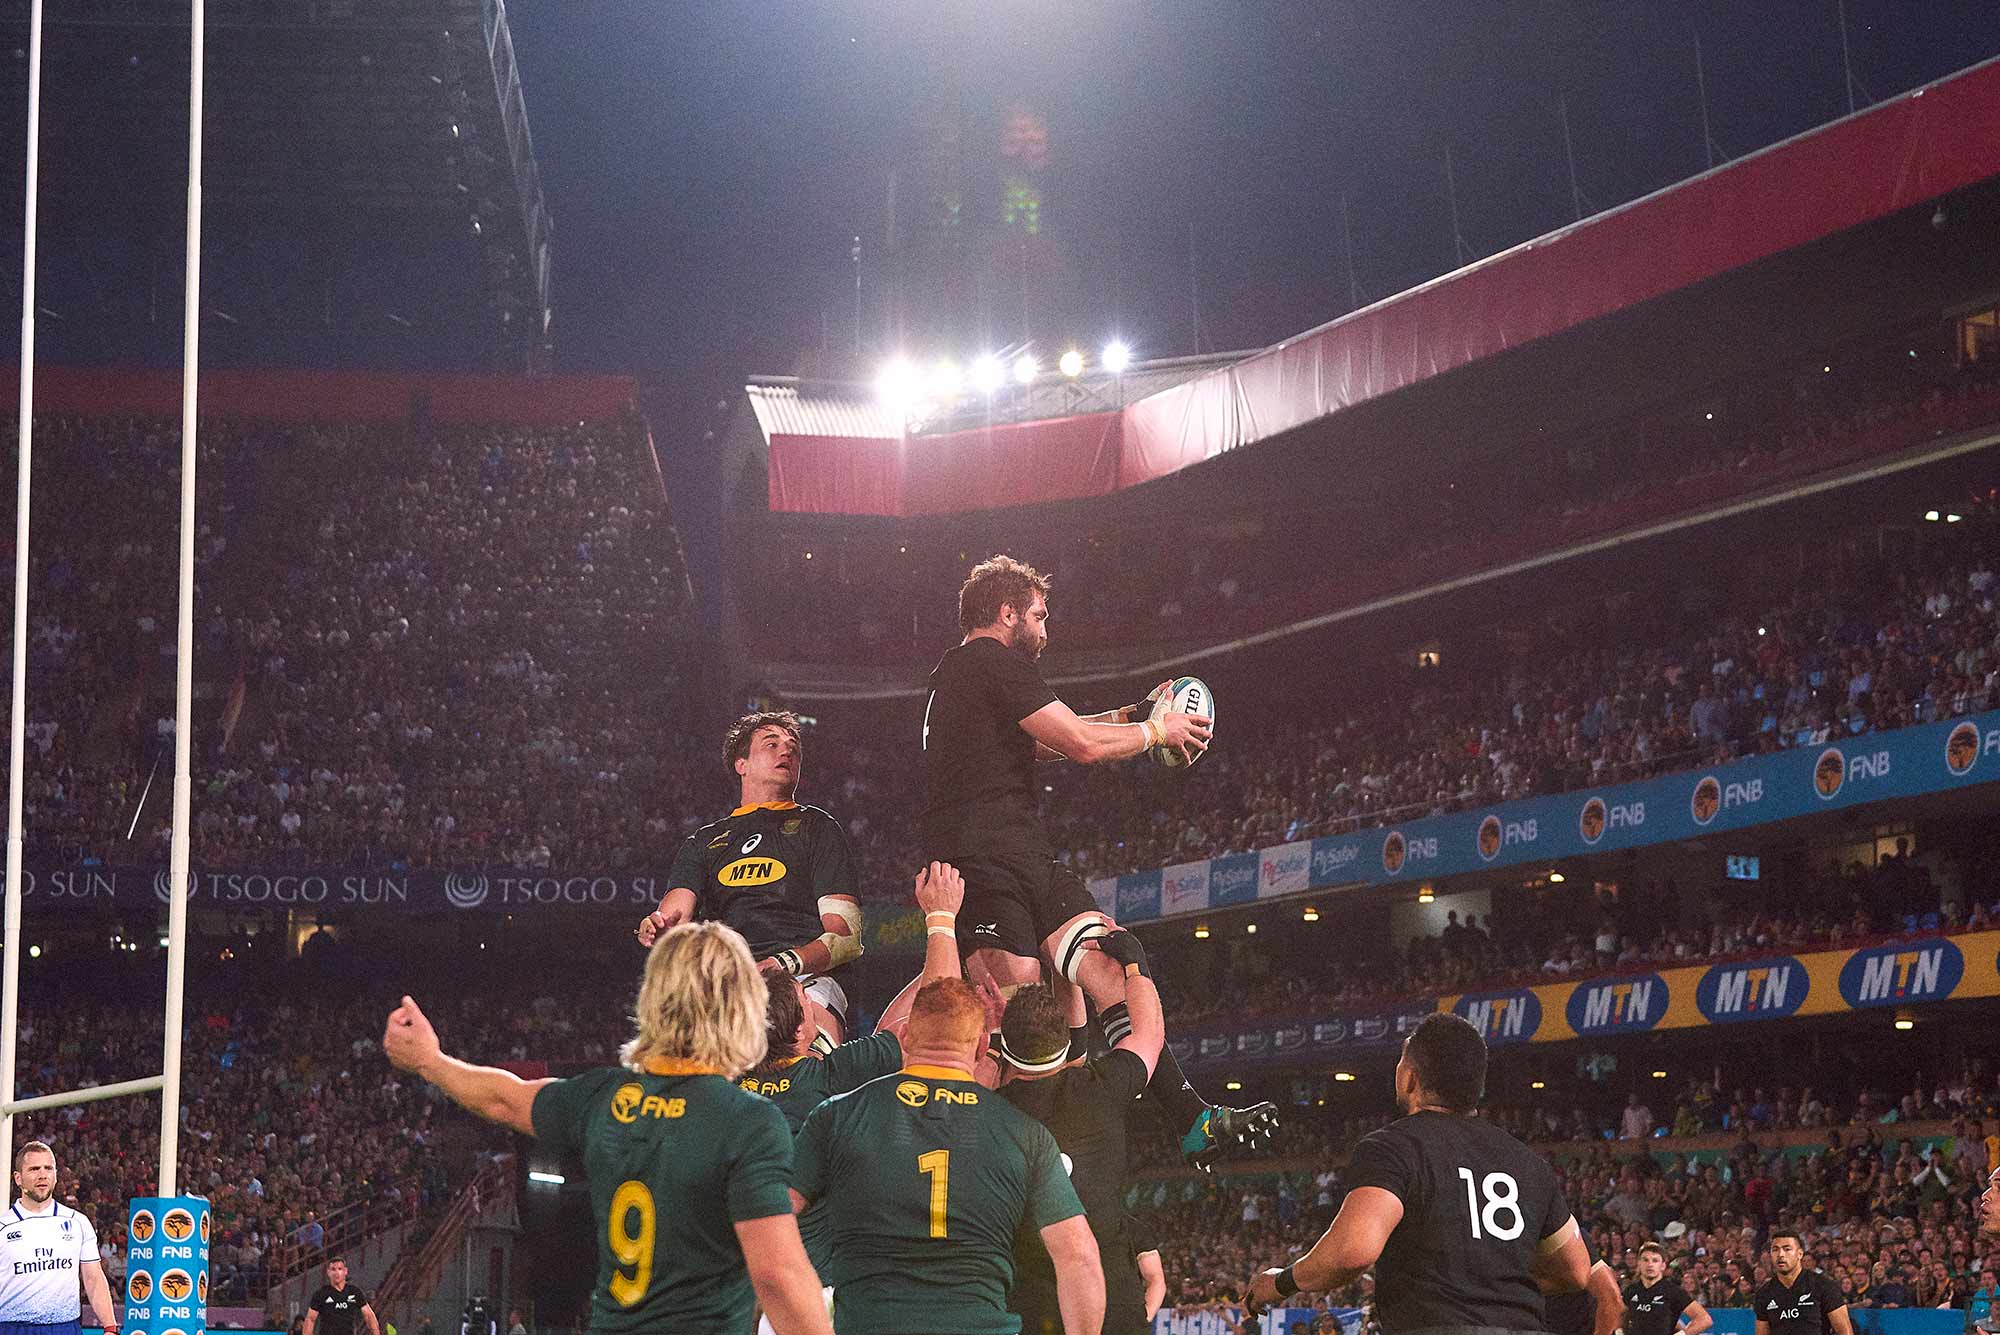 Rugby World Cup Champions of 2019 take on The All Blacks at Loftus Versveld in Johannesburg imagery forms part of the photographic campaign for ASICS Global